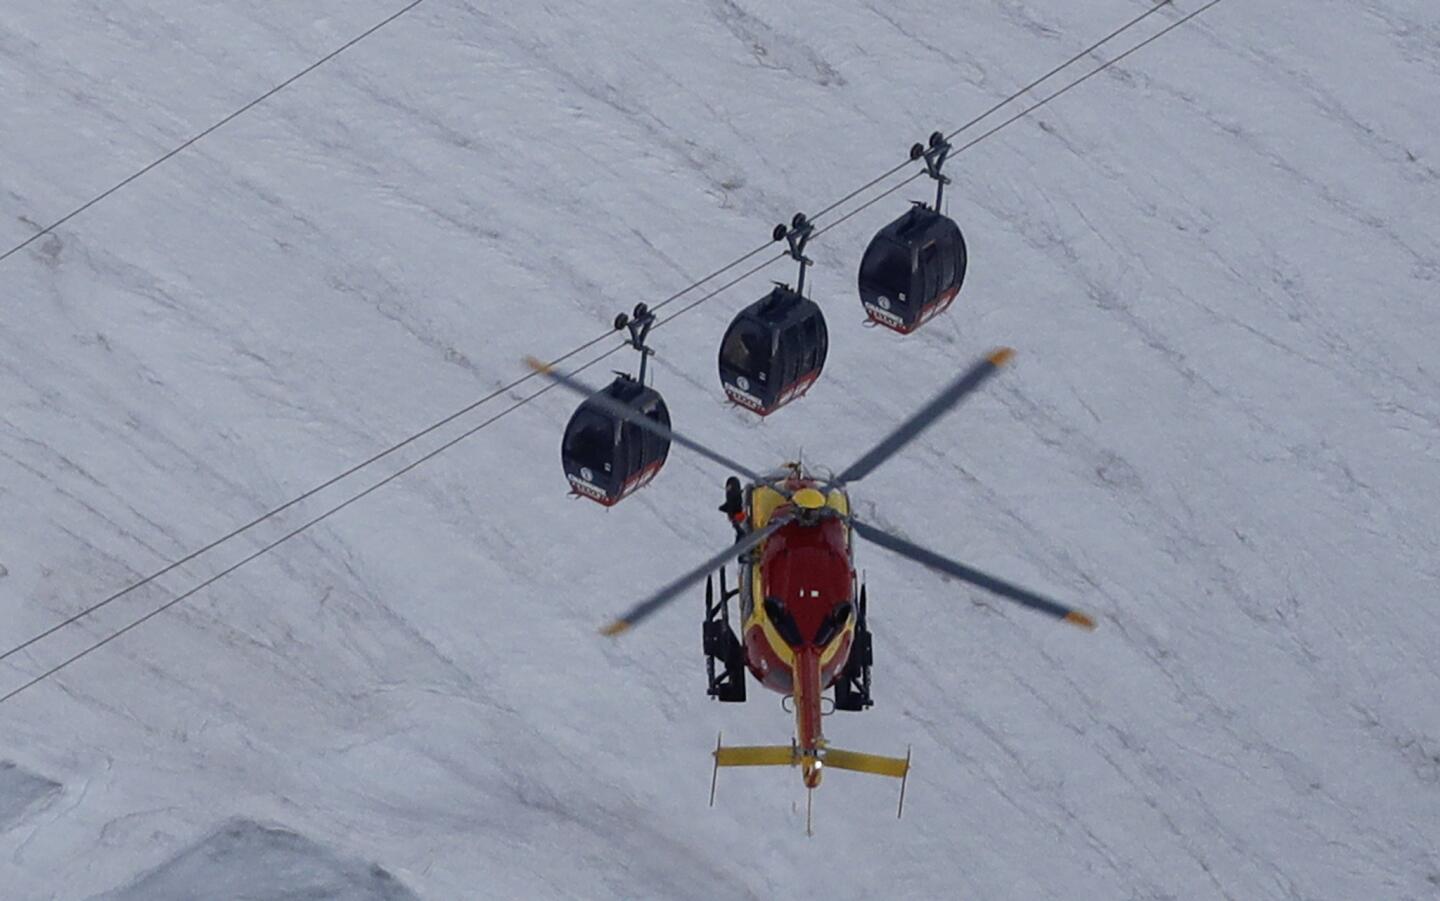 An EC-135 helicopter operated by the French Societe Civile hovers near three stuck cable cars.